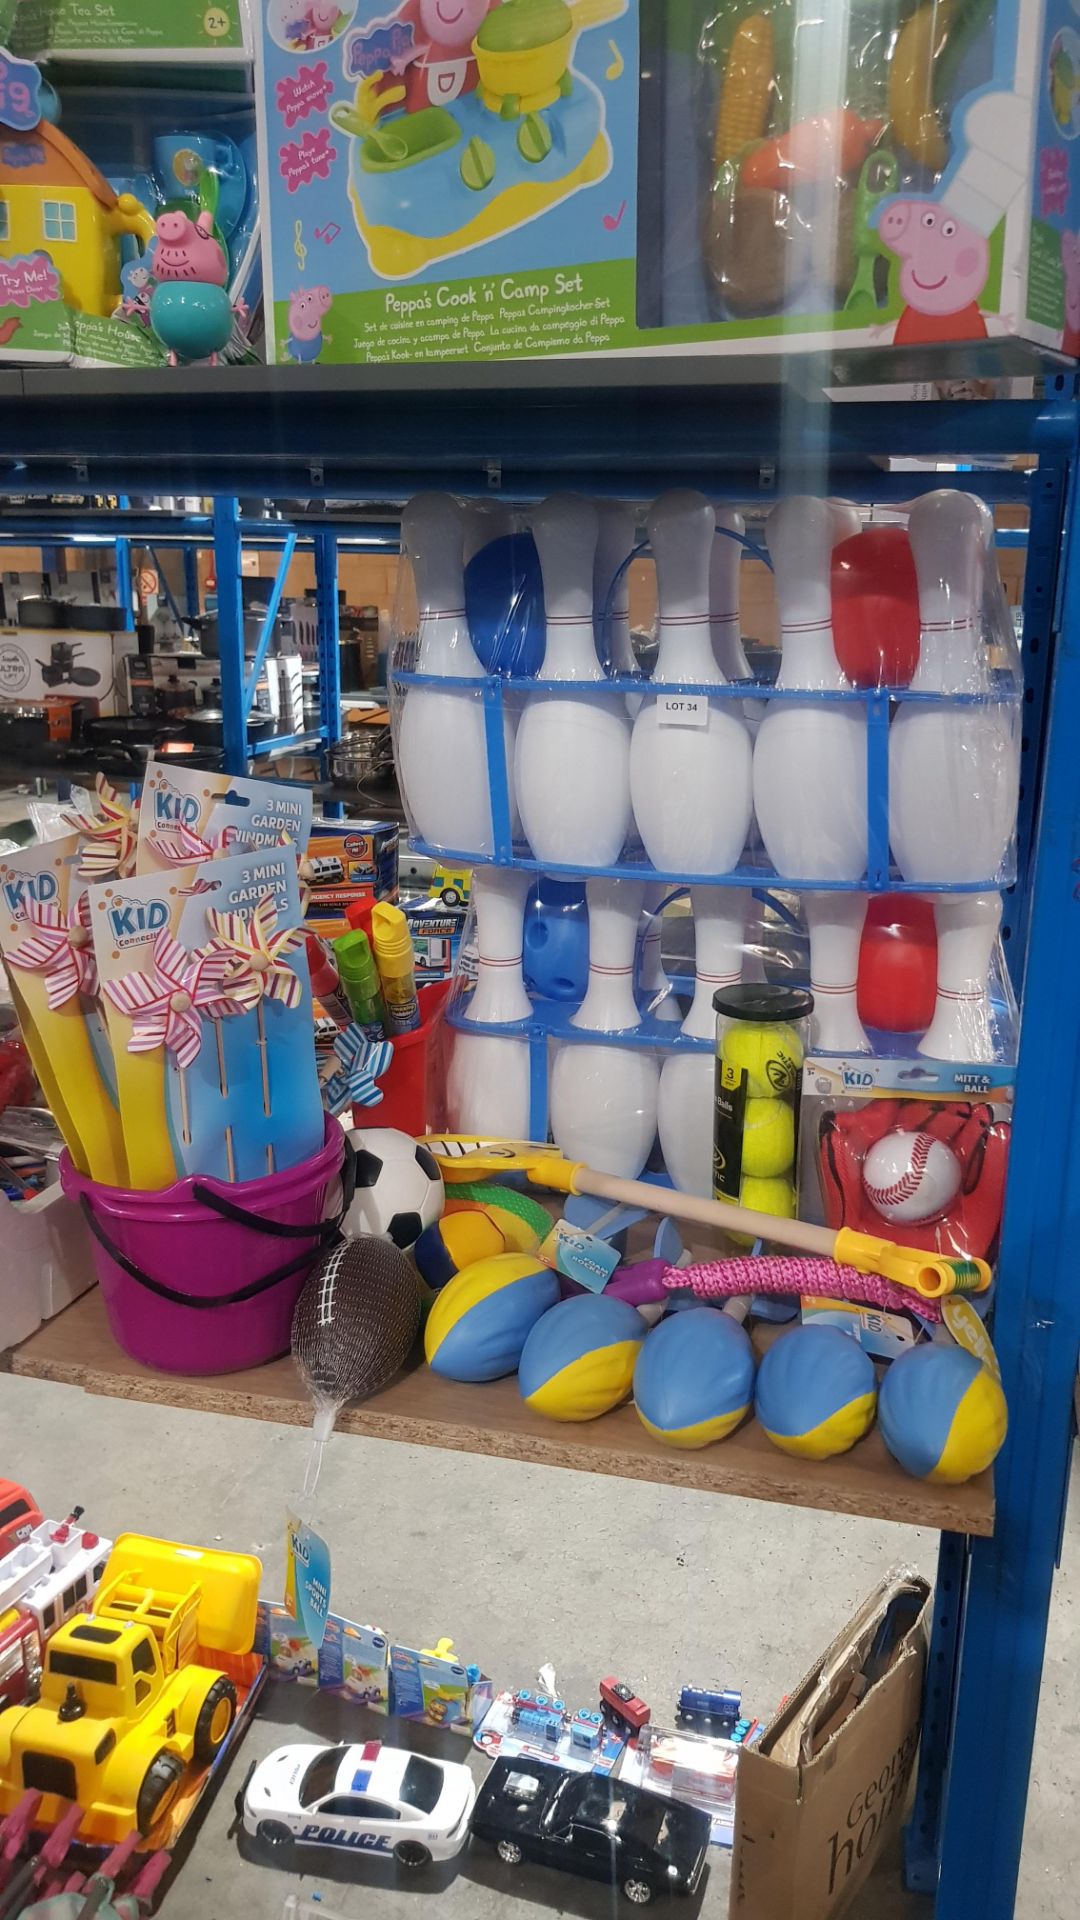 Approx 30 Items : To Include 12 X Giant Bowling Set, 5 X Foam Rocket, Amazing Bubbles, Tennis Balls